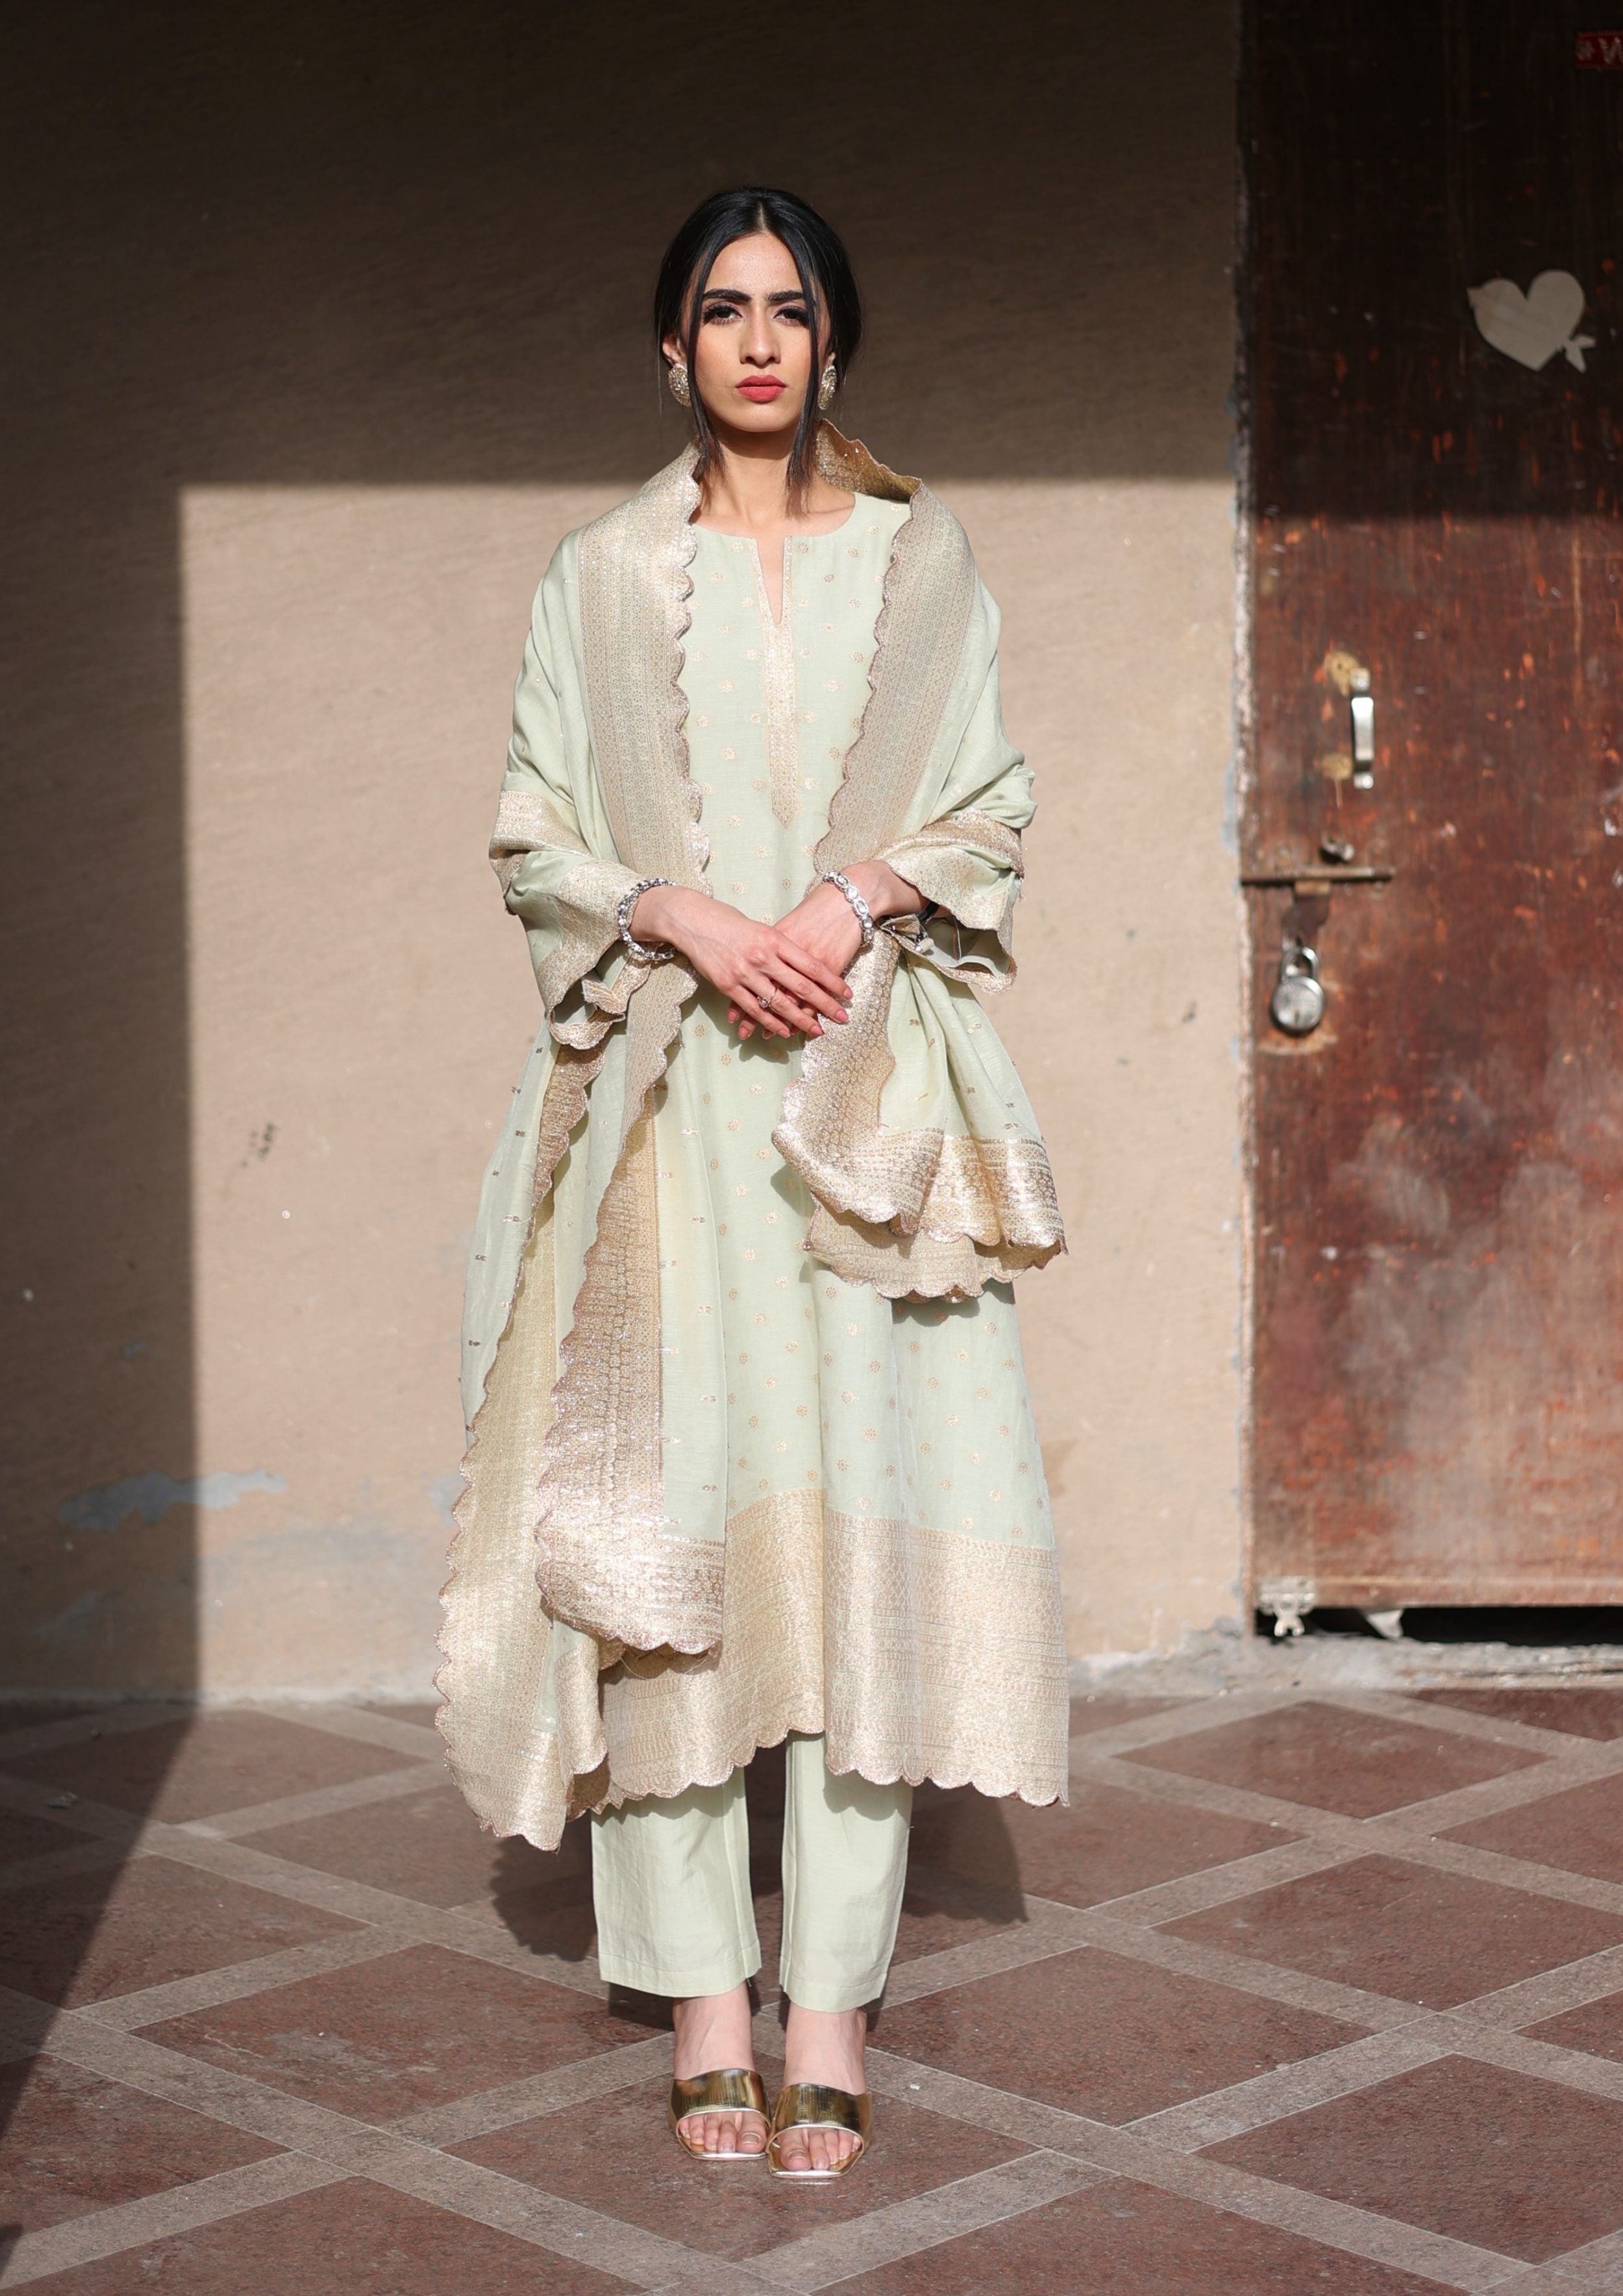 THE NAMEH SCALLOPED SUIT